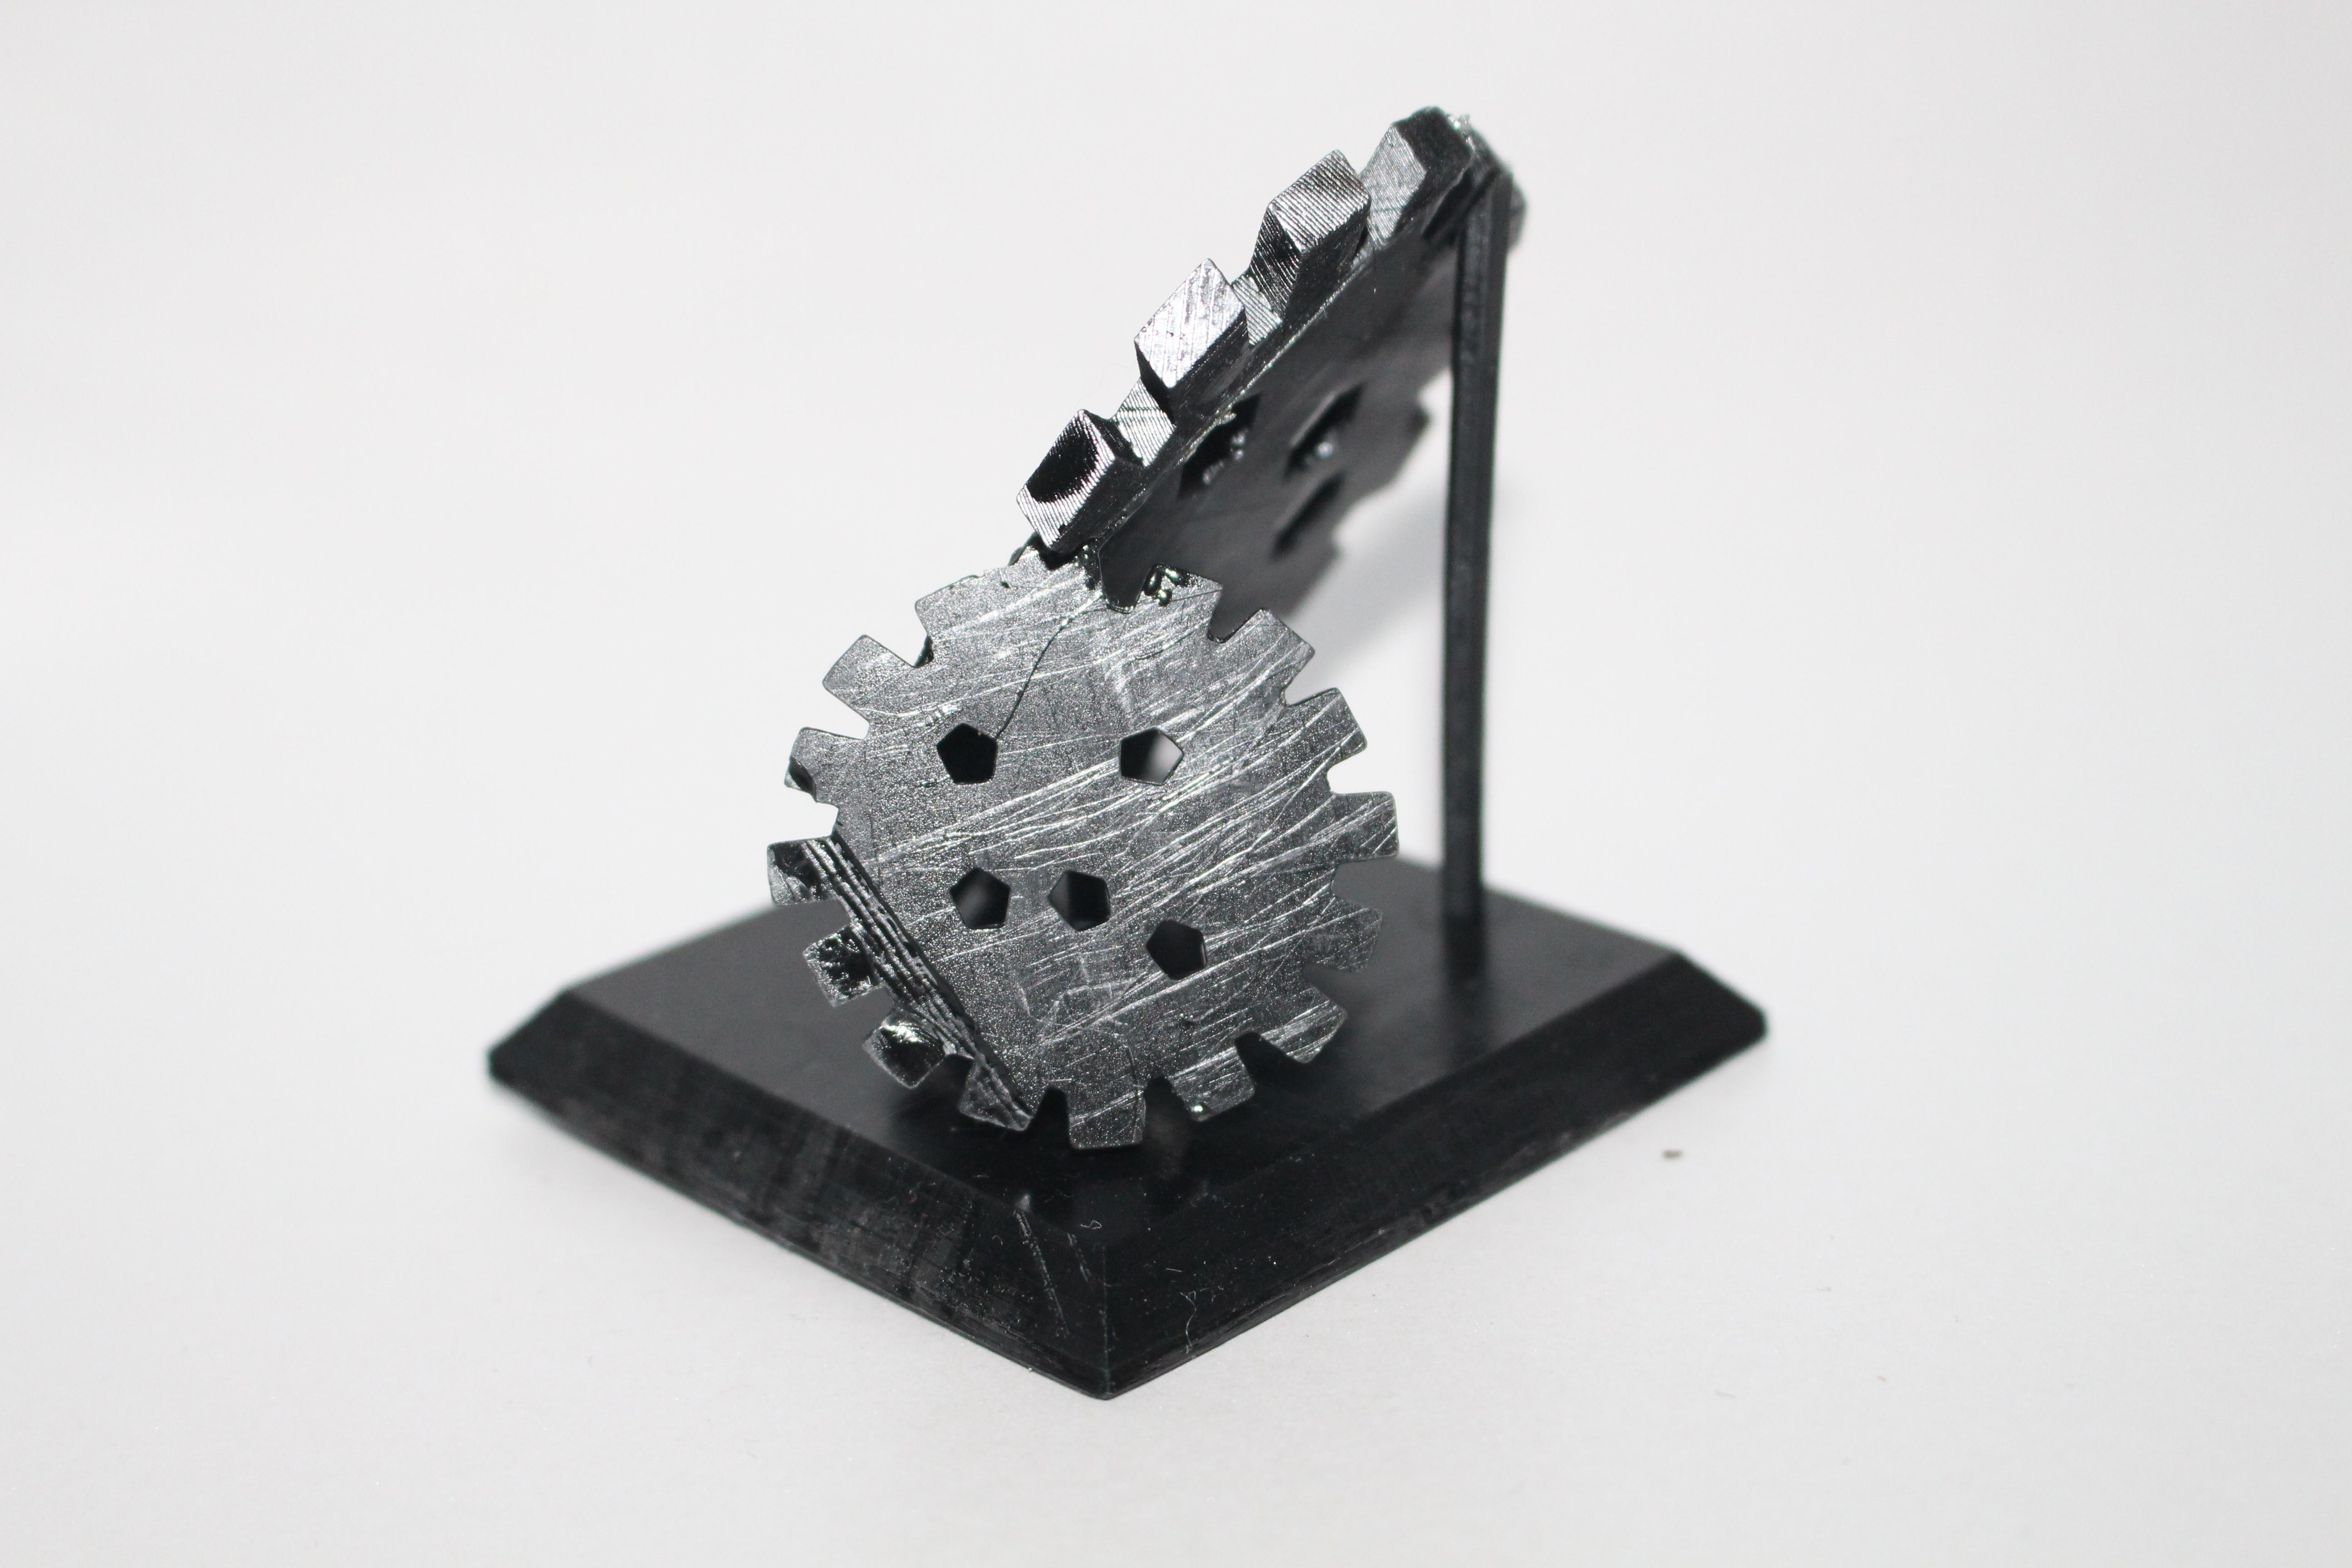 DA B3ST 3D PRINTING TROPHY YOU WILL EVER SEE